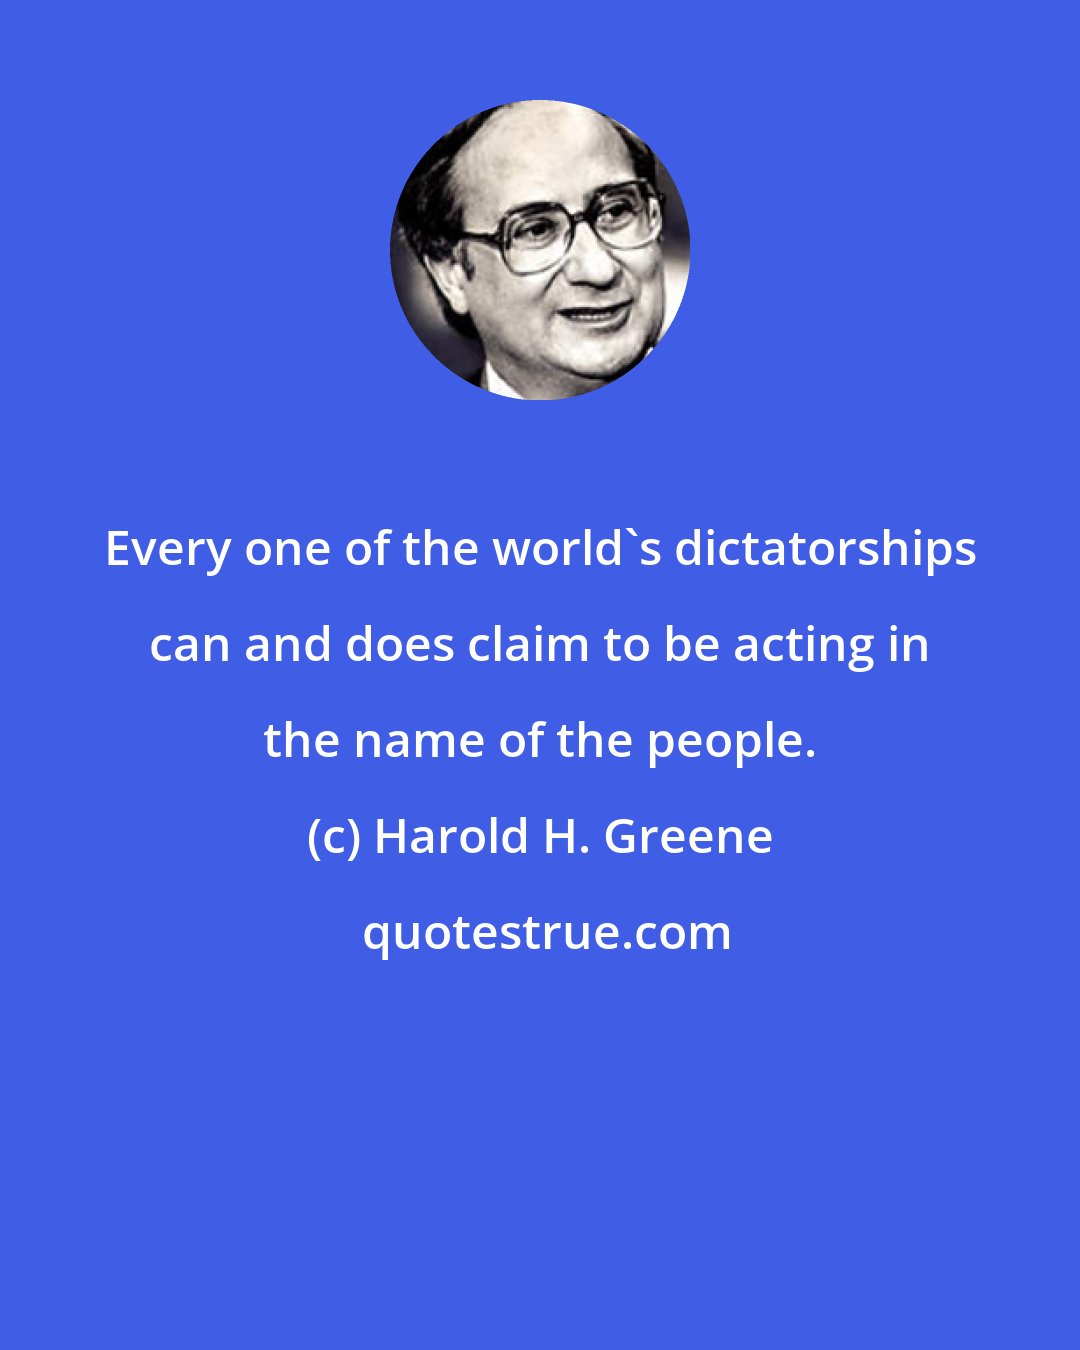 Harold H. Greene: Every one of the world's dictatorships can and does claim to be acting in the name of the people.